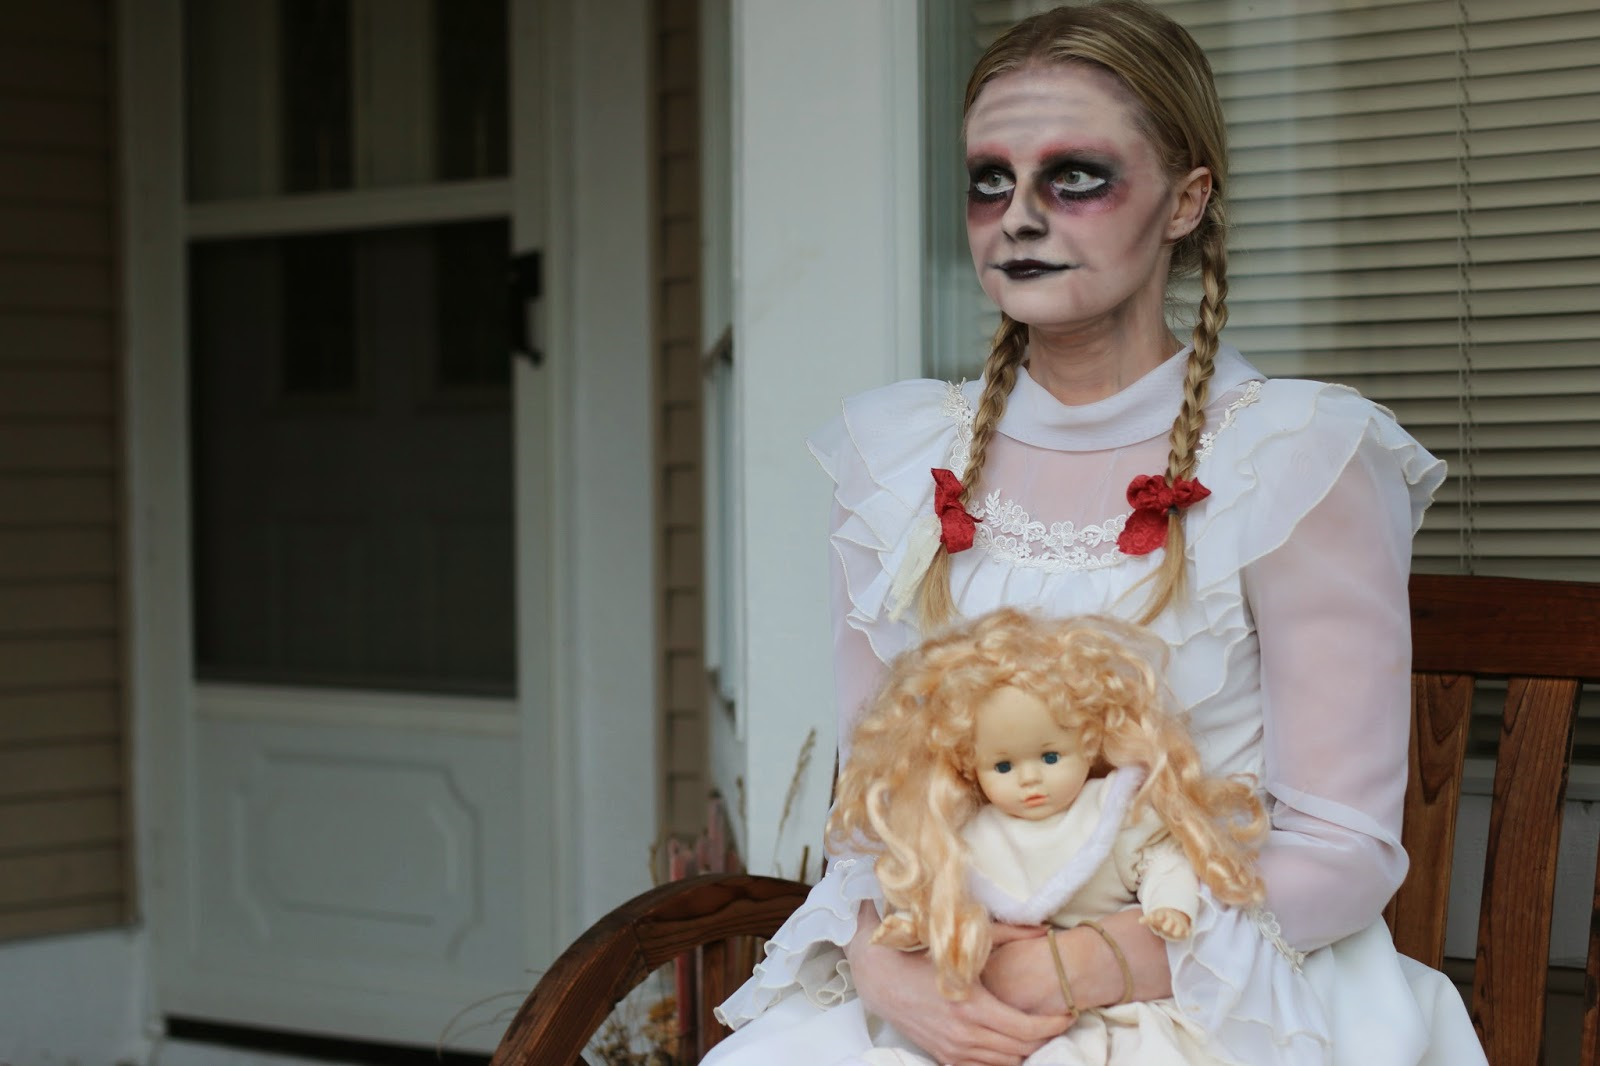 The Best Way To Creepy Little Girl Costume